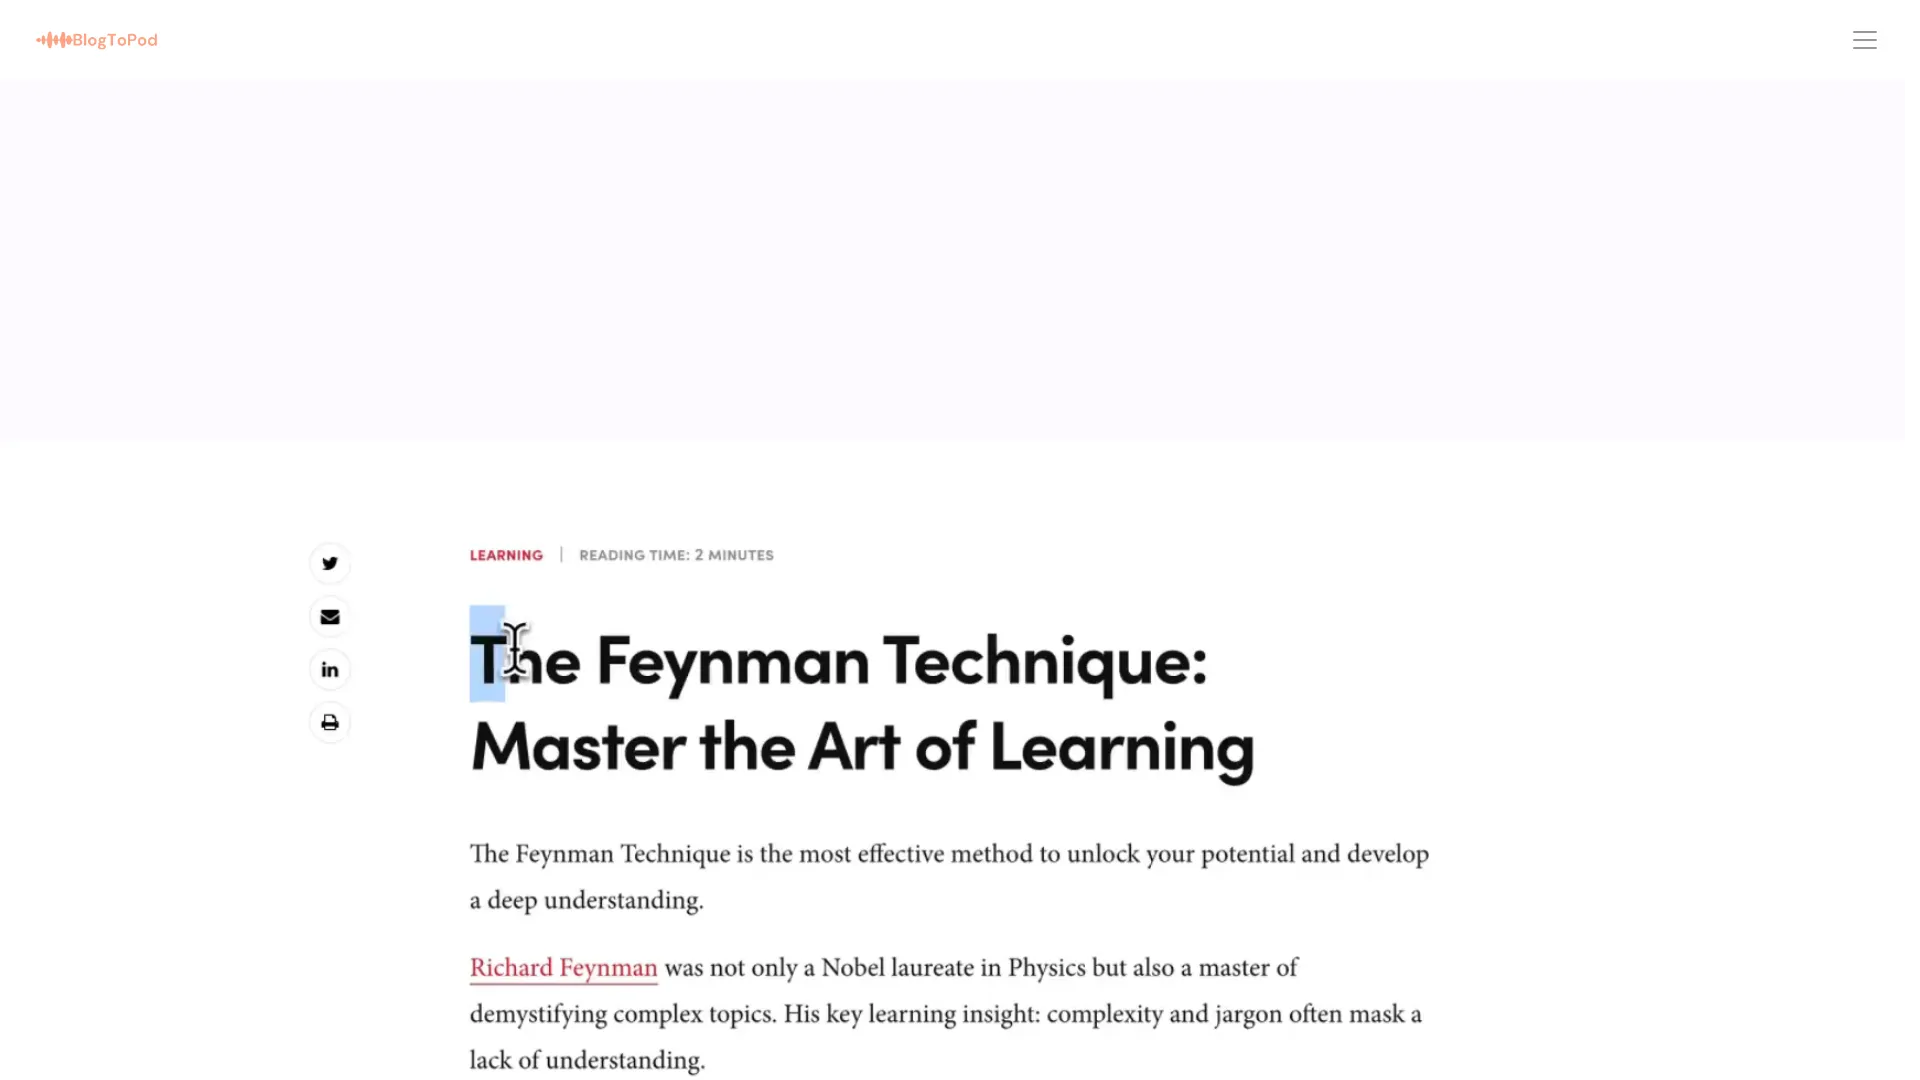 The Feynman Technique: Master the Art of Learning